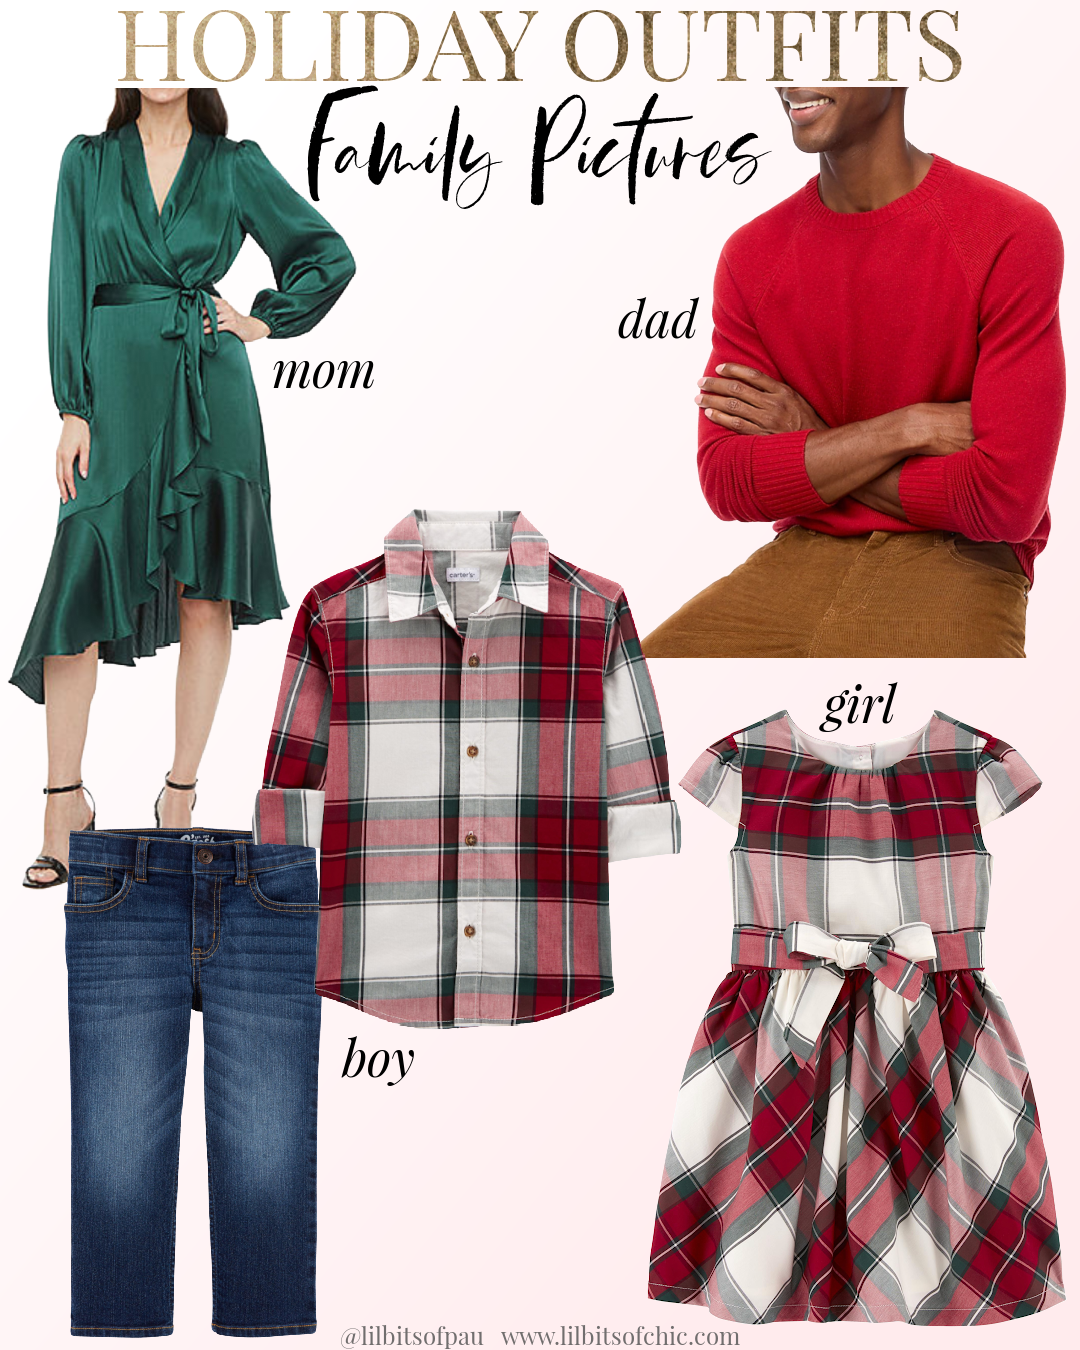 Elegant Christmas Picture outfits for the family, coordinating holiday outfits for the family